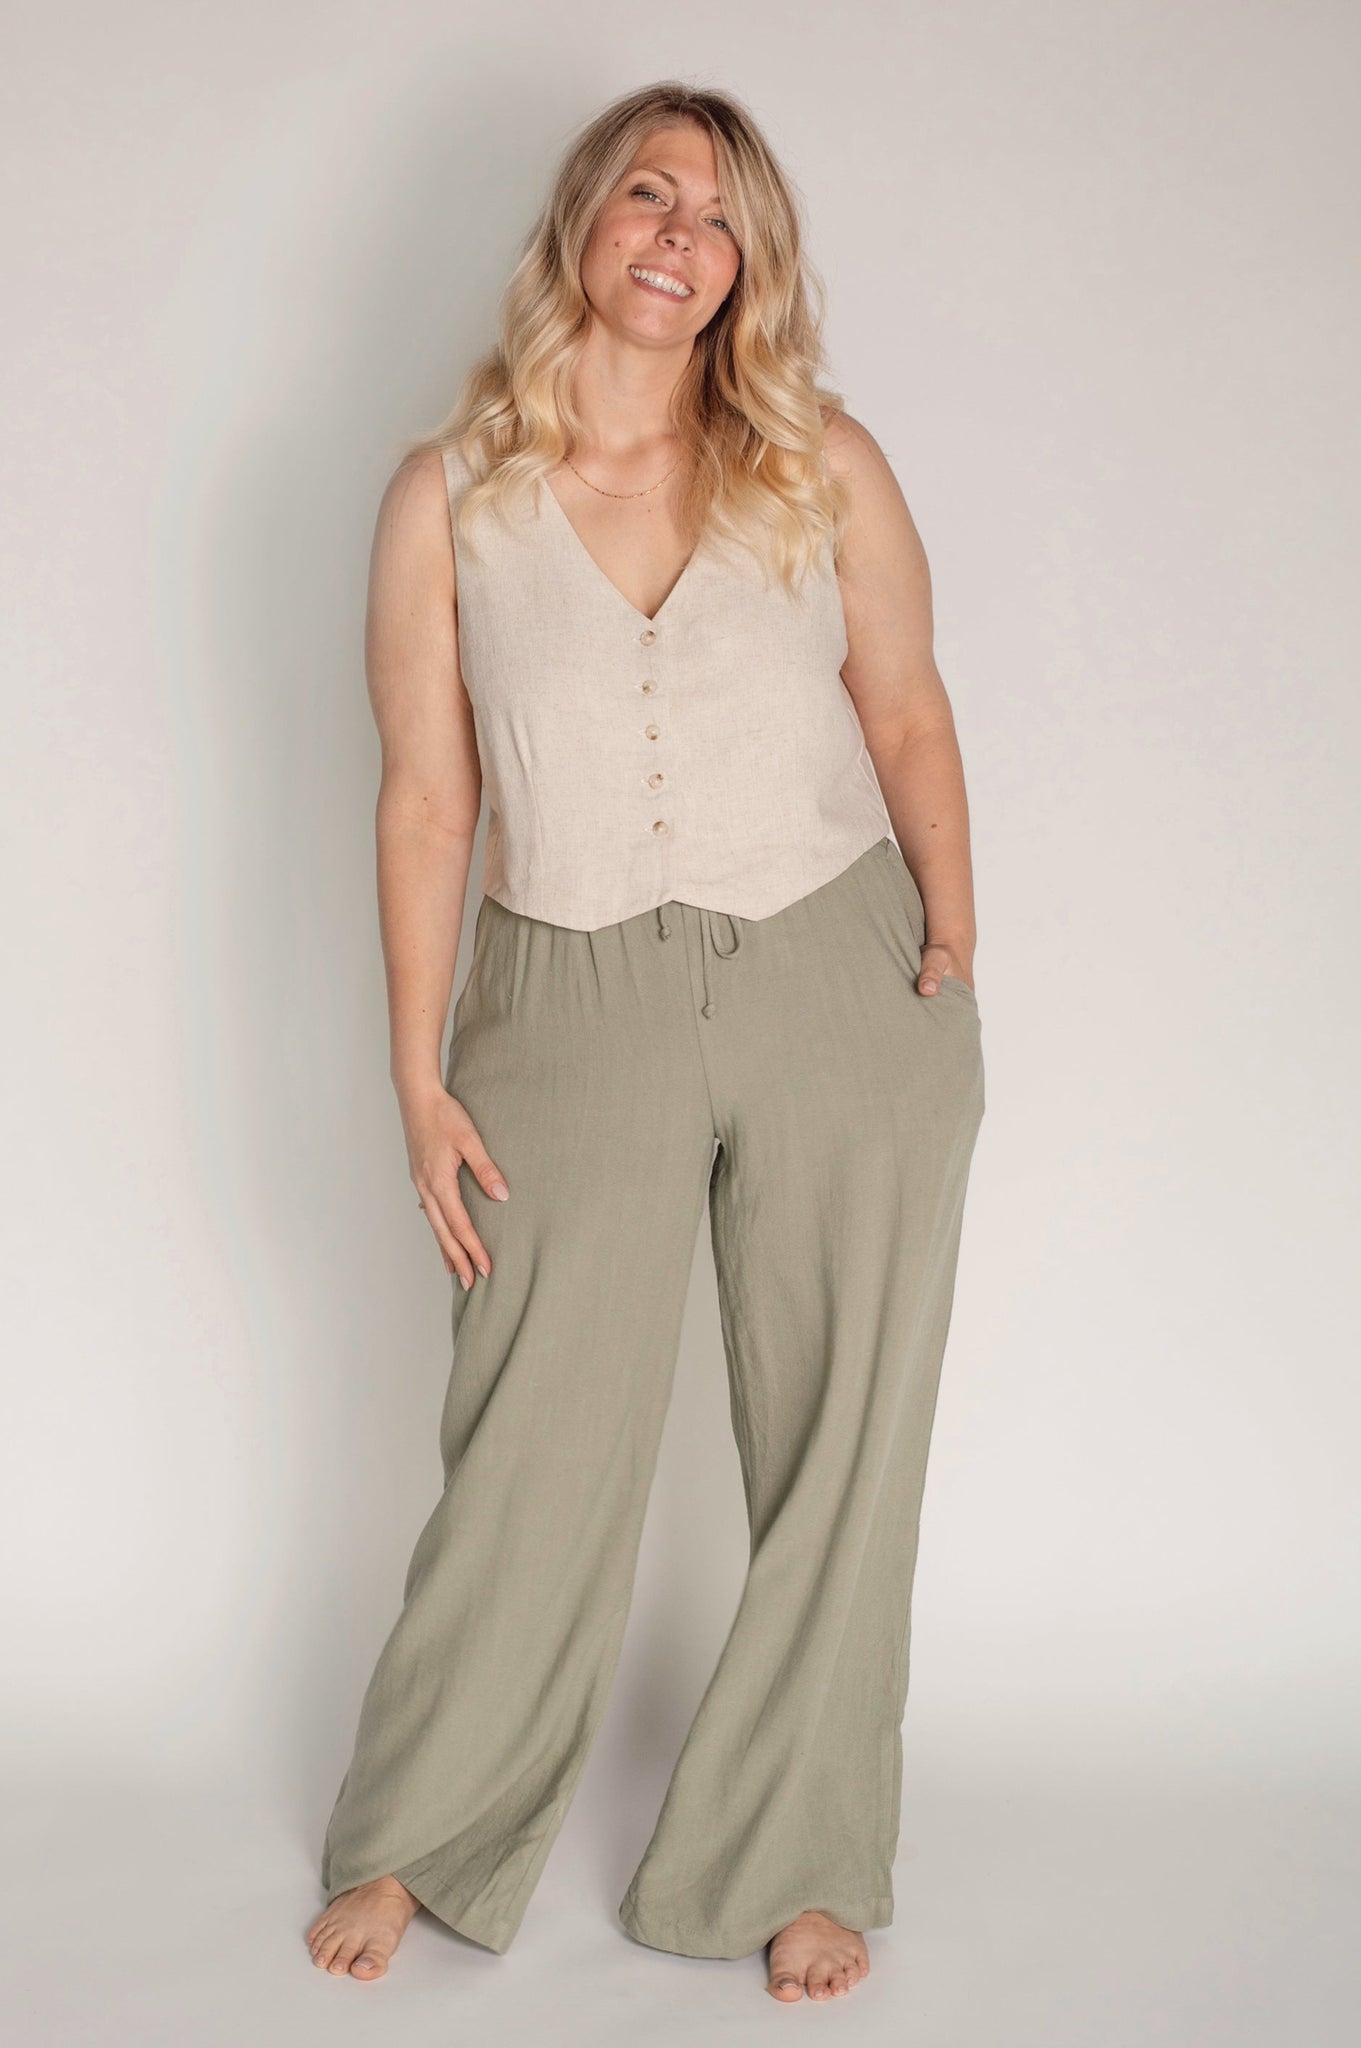 The Relaxed Linen Pant